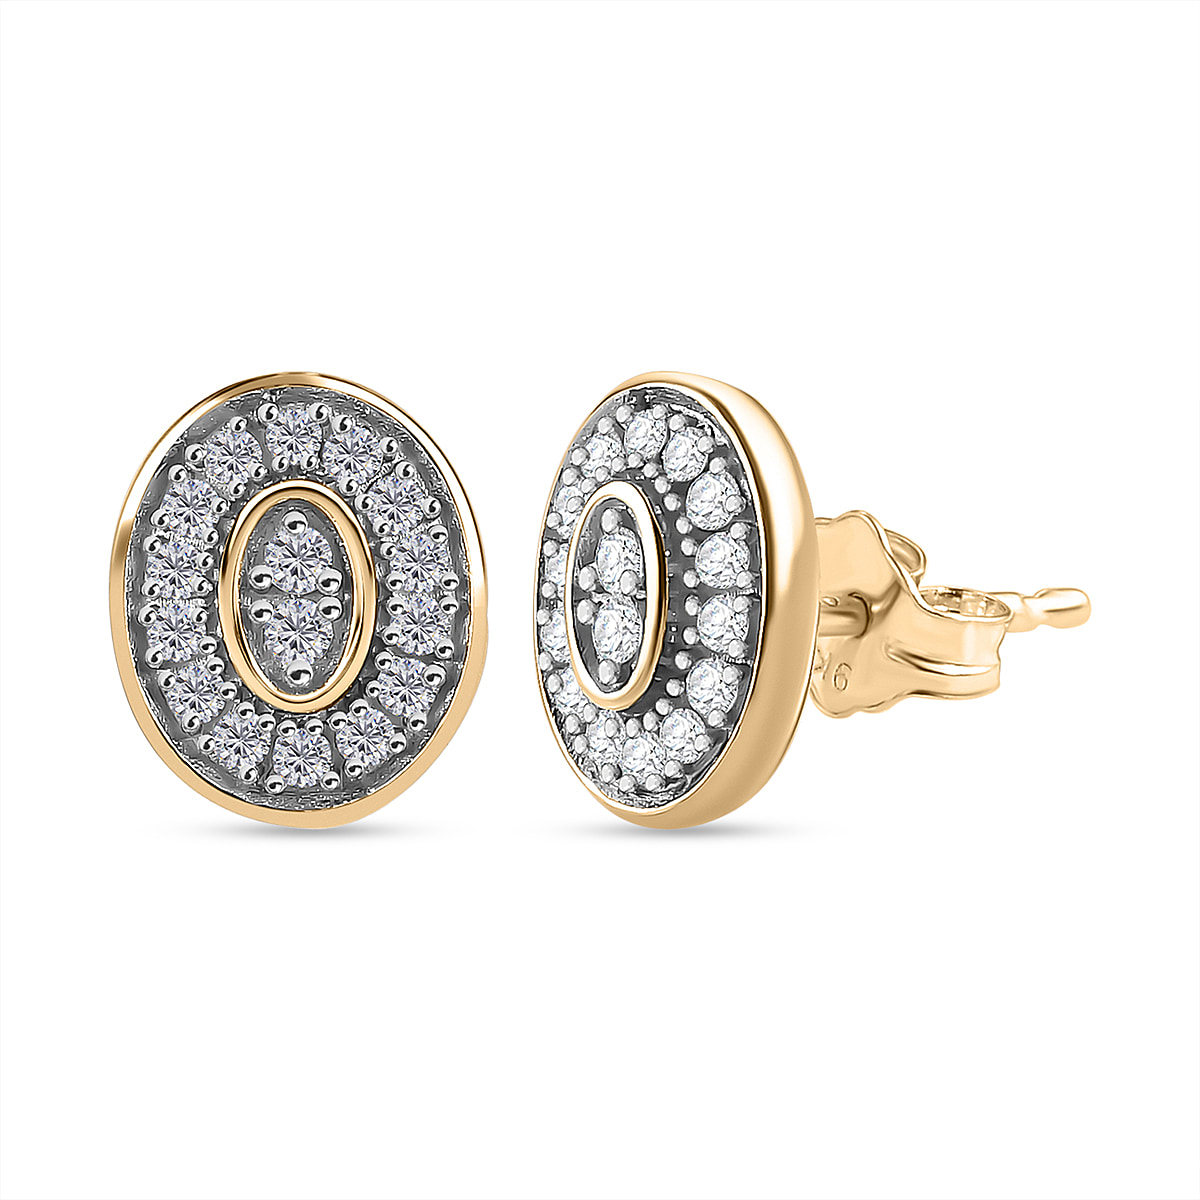 TLV Your Choice - 9K Yellow Gold Natural White Diamond Earrings - Oval